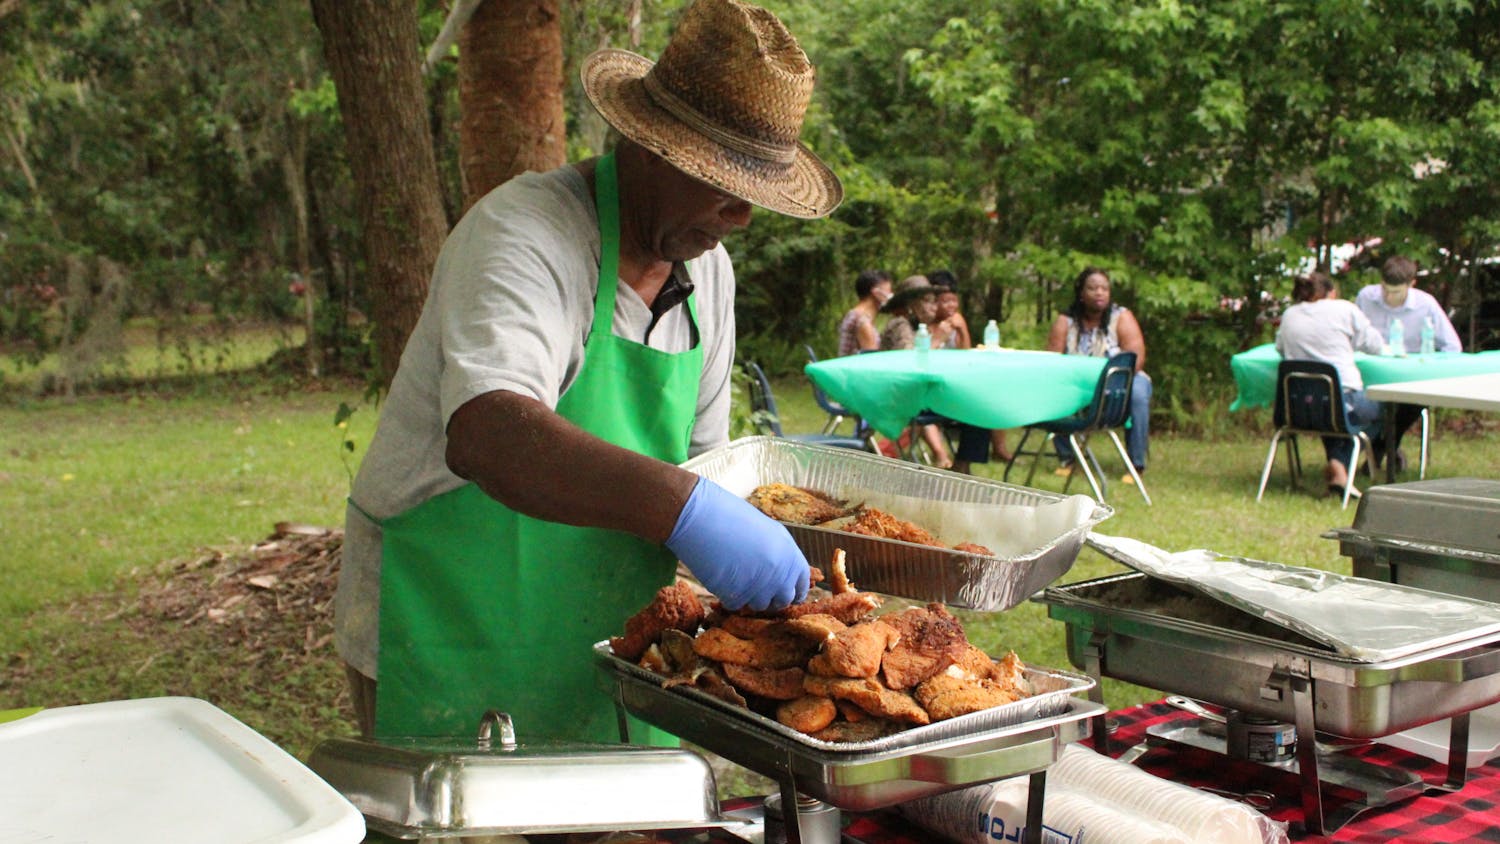 George Foxx helps serve food for the Florida Emancipation Day celebration at the Cotton Club Museum and Cultural Center on Friday, May 20, 2022.